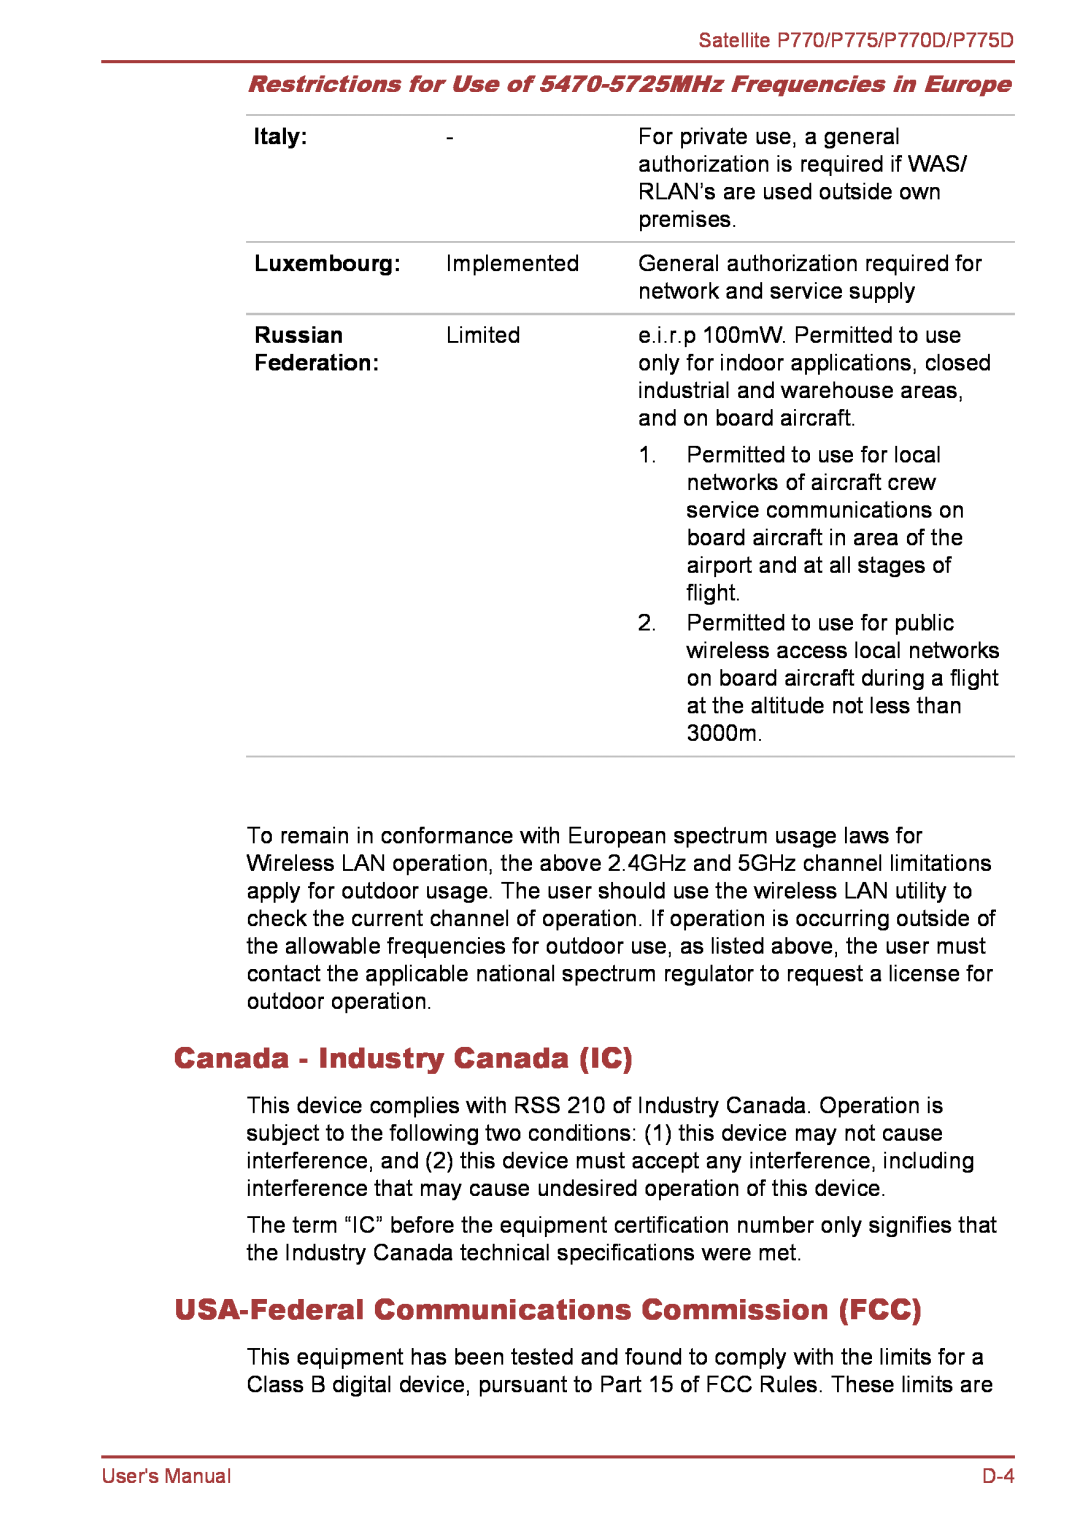 Toshiba P770 user manual Canada - Industry Canada IC, USA-Federal Communications Commission FCC, Italy, Luxembourg, Russian 